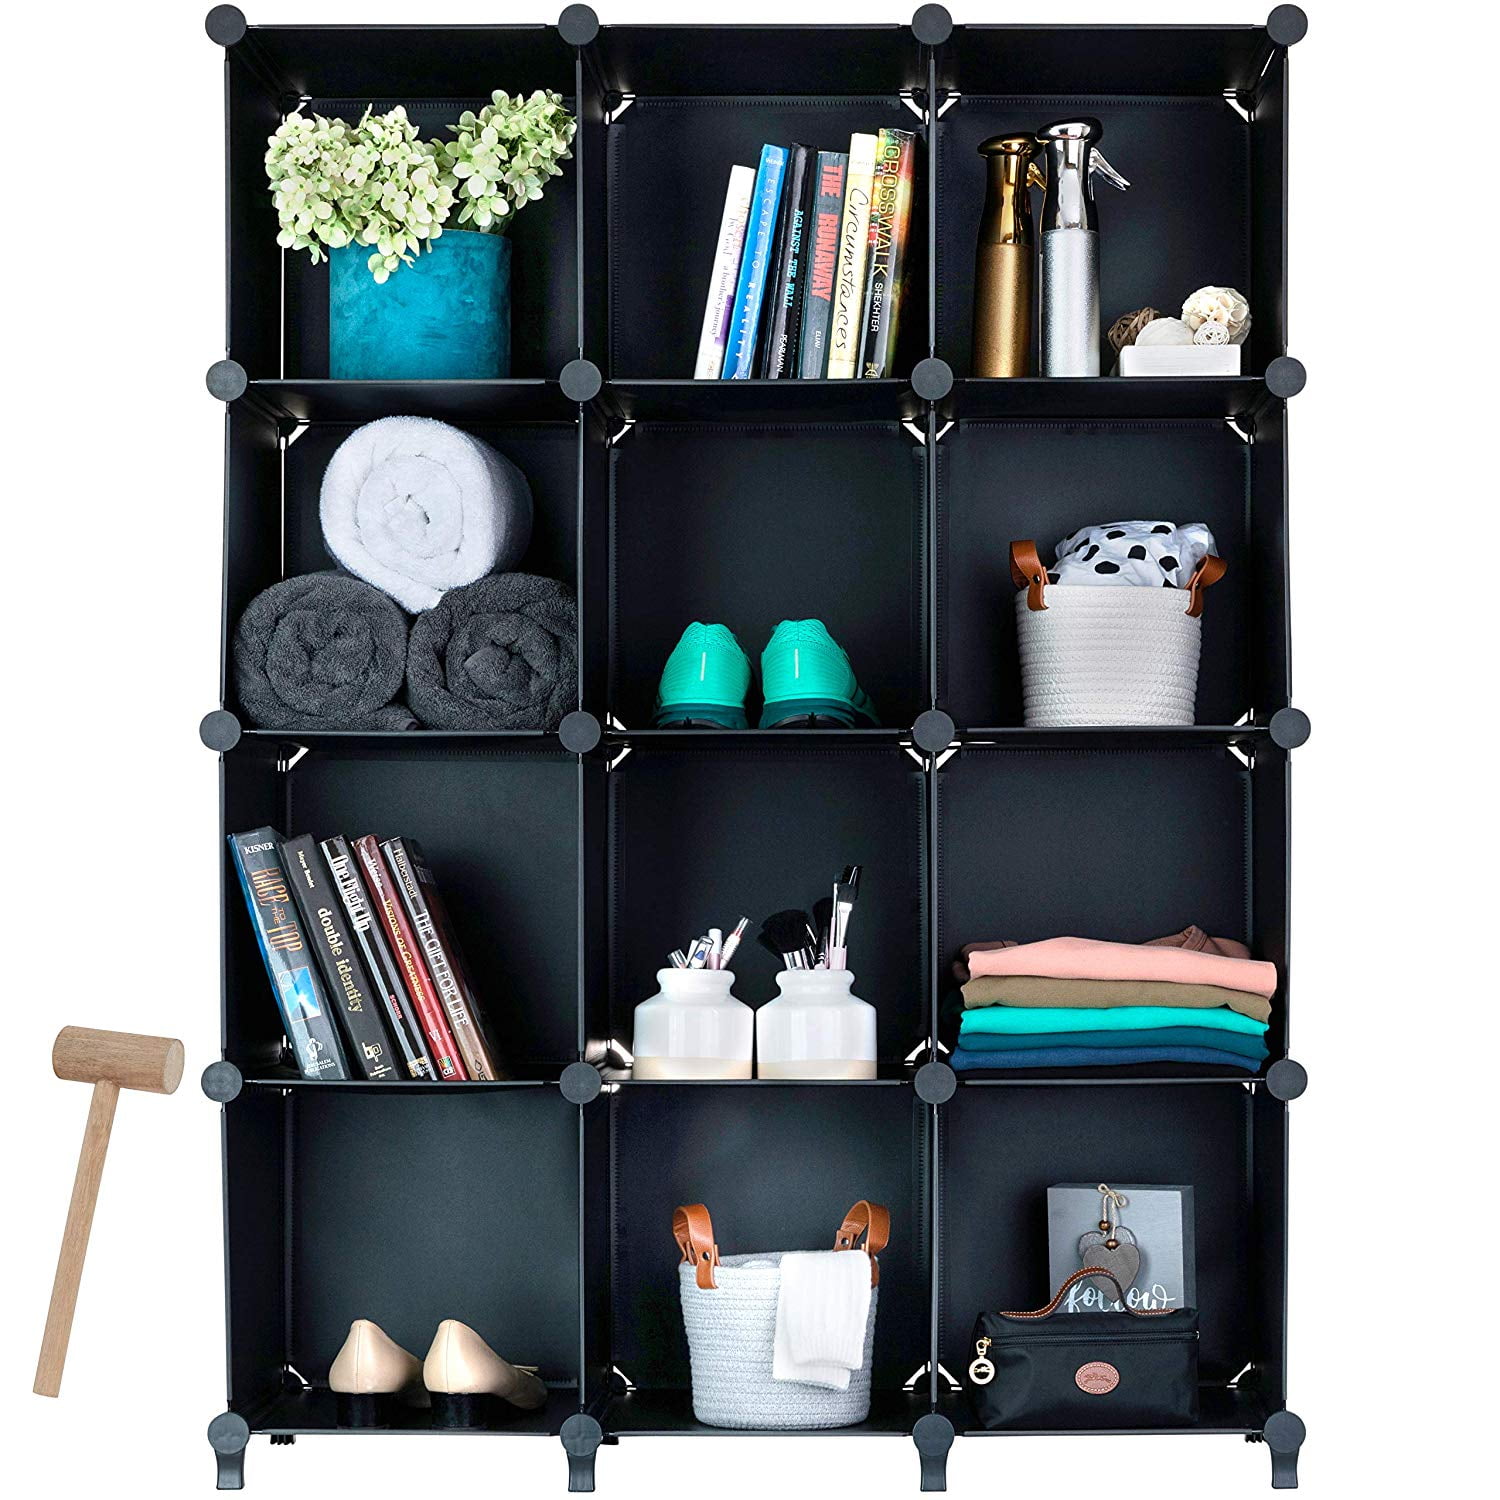 Greenstell 12 Cubes Storage Organizer,DIY Plastic Stackable Shelves Multifunctional Modular Bookcase Closet Cabinet for Books,Cl